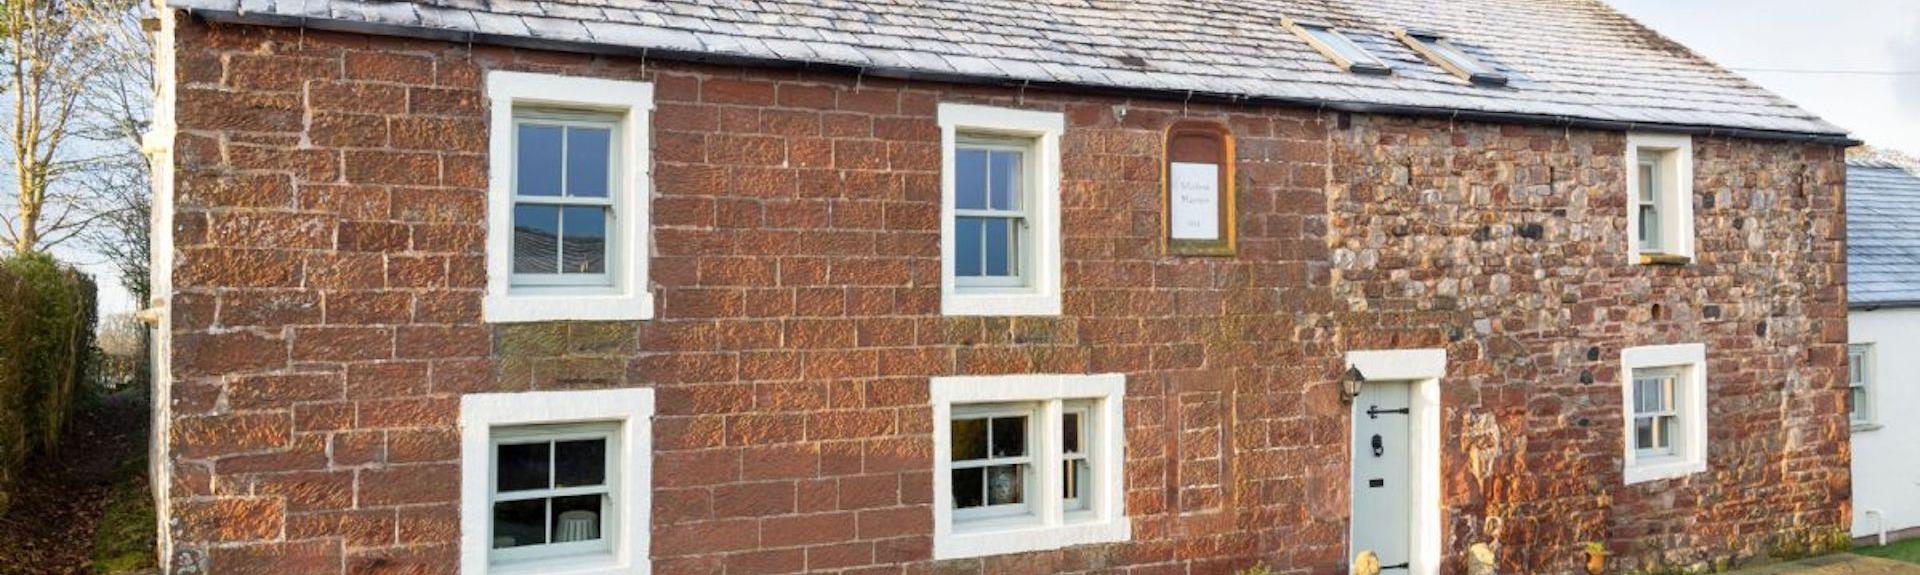 Stone built front exterior of a traditional Cumbrian cottage overlooking a quiet road.